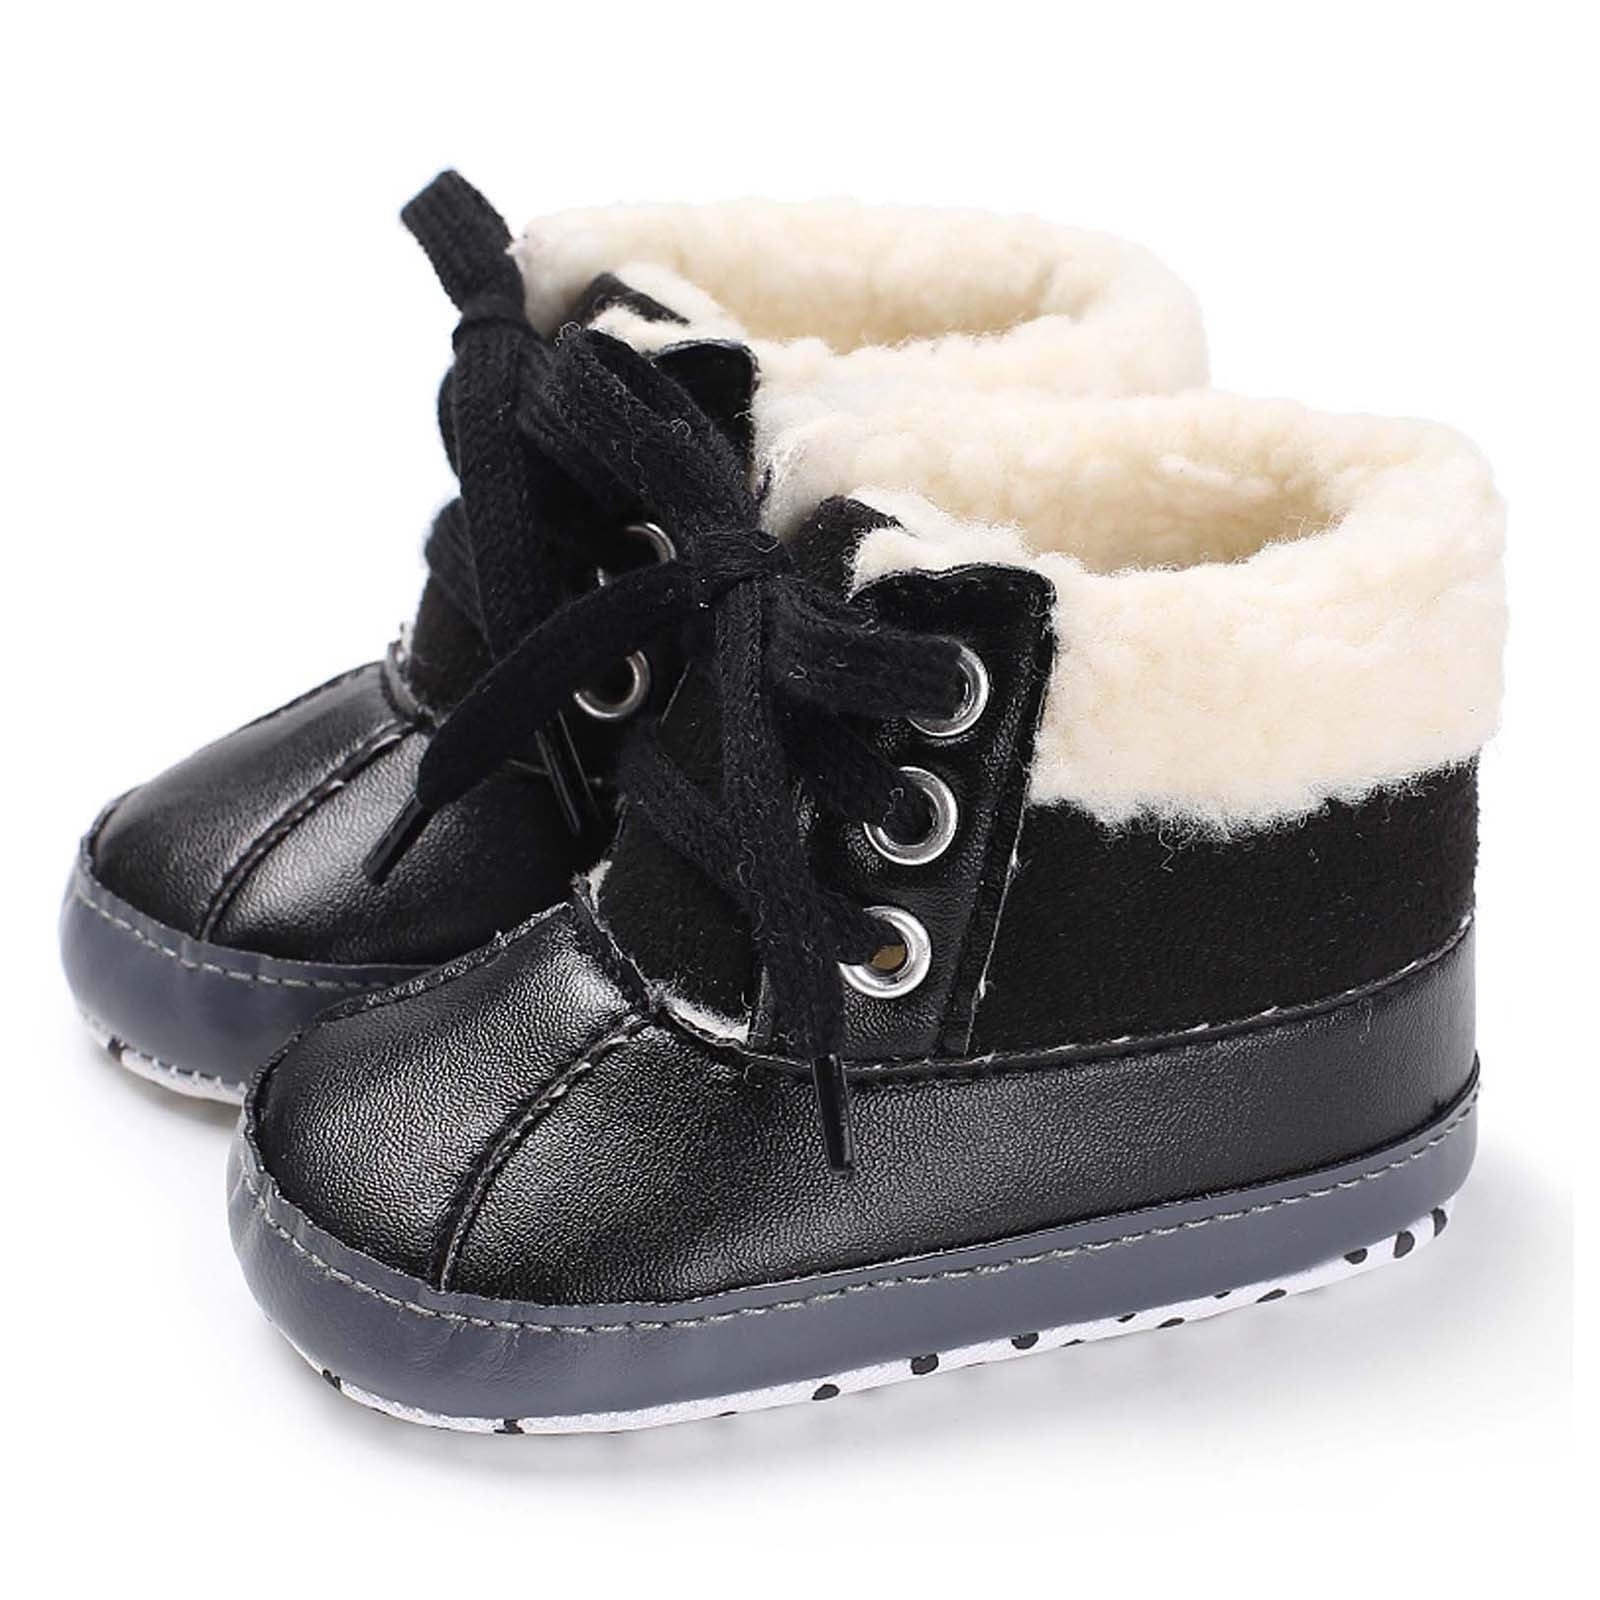 Toddler/Little Kid Hiking Outdoor Martin Boots Classic and Waterproof BENHERO Kids Boys Girls Boots Rain Winter Snow Ankle Booties 